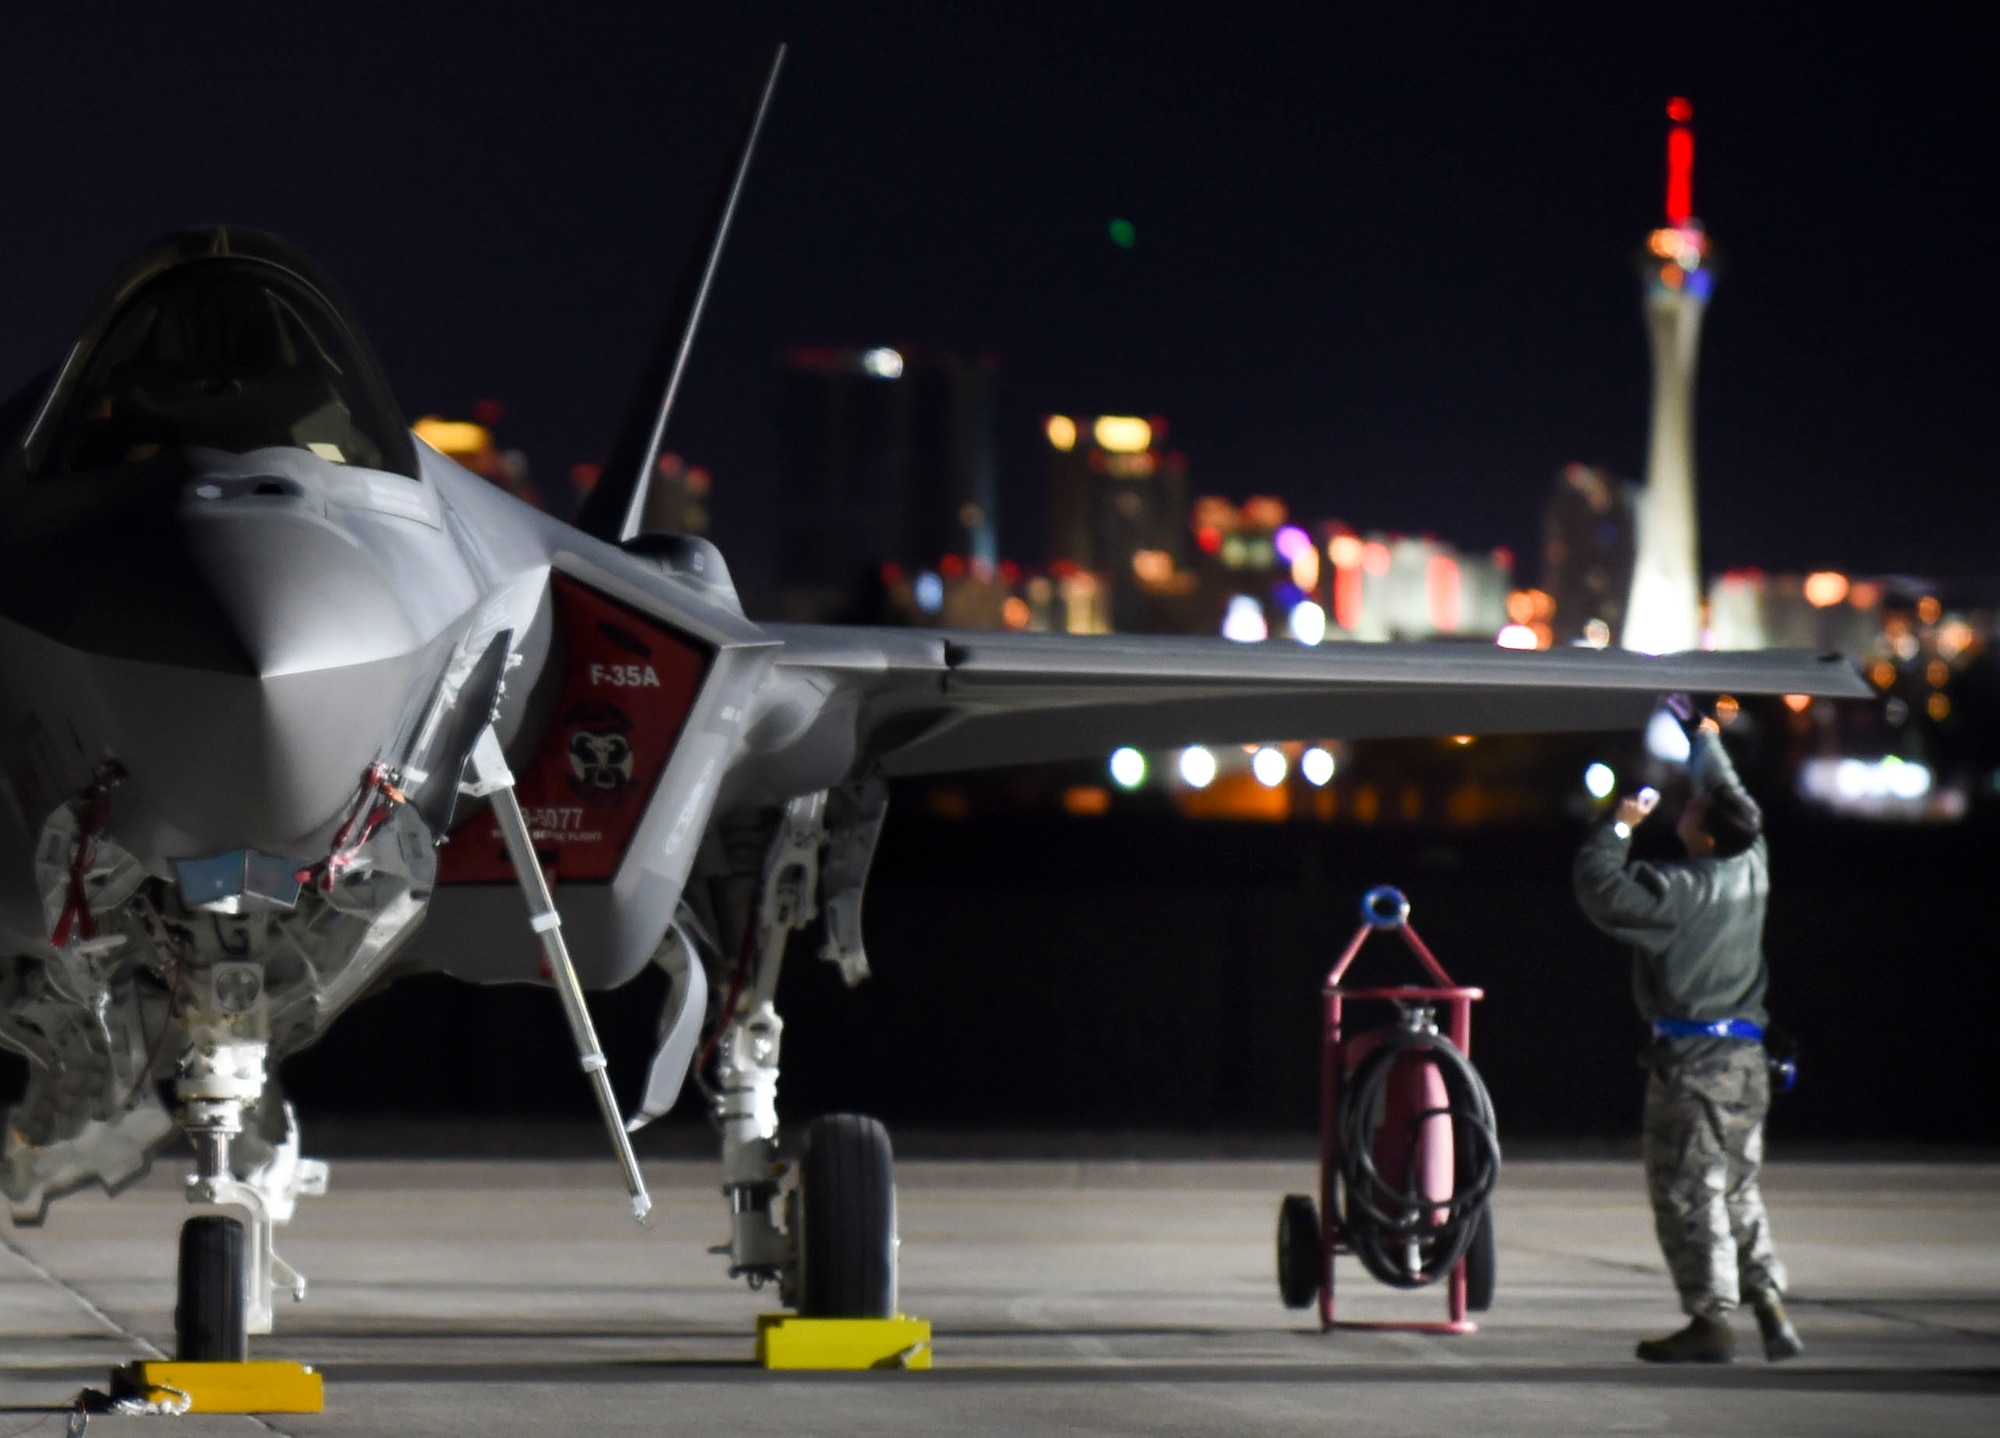 A maintainer with the 388th Fighter Wing out of Hill Air Force Base, Utah, checks for structural damages on an F-35A Lightning II during Red Flag 17-1 at Nellis Air Force Base, Nev., Jan. 25, 2017. For most non-structural and all structural repairs, low observable aircraft structure technicians must either fix the paneling damage or remove paneling for maintainers to repair other issues. (U.S. Air Force photo by Staff Sgt. Natasha Stannard)